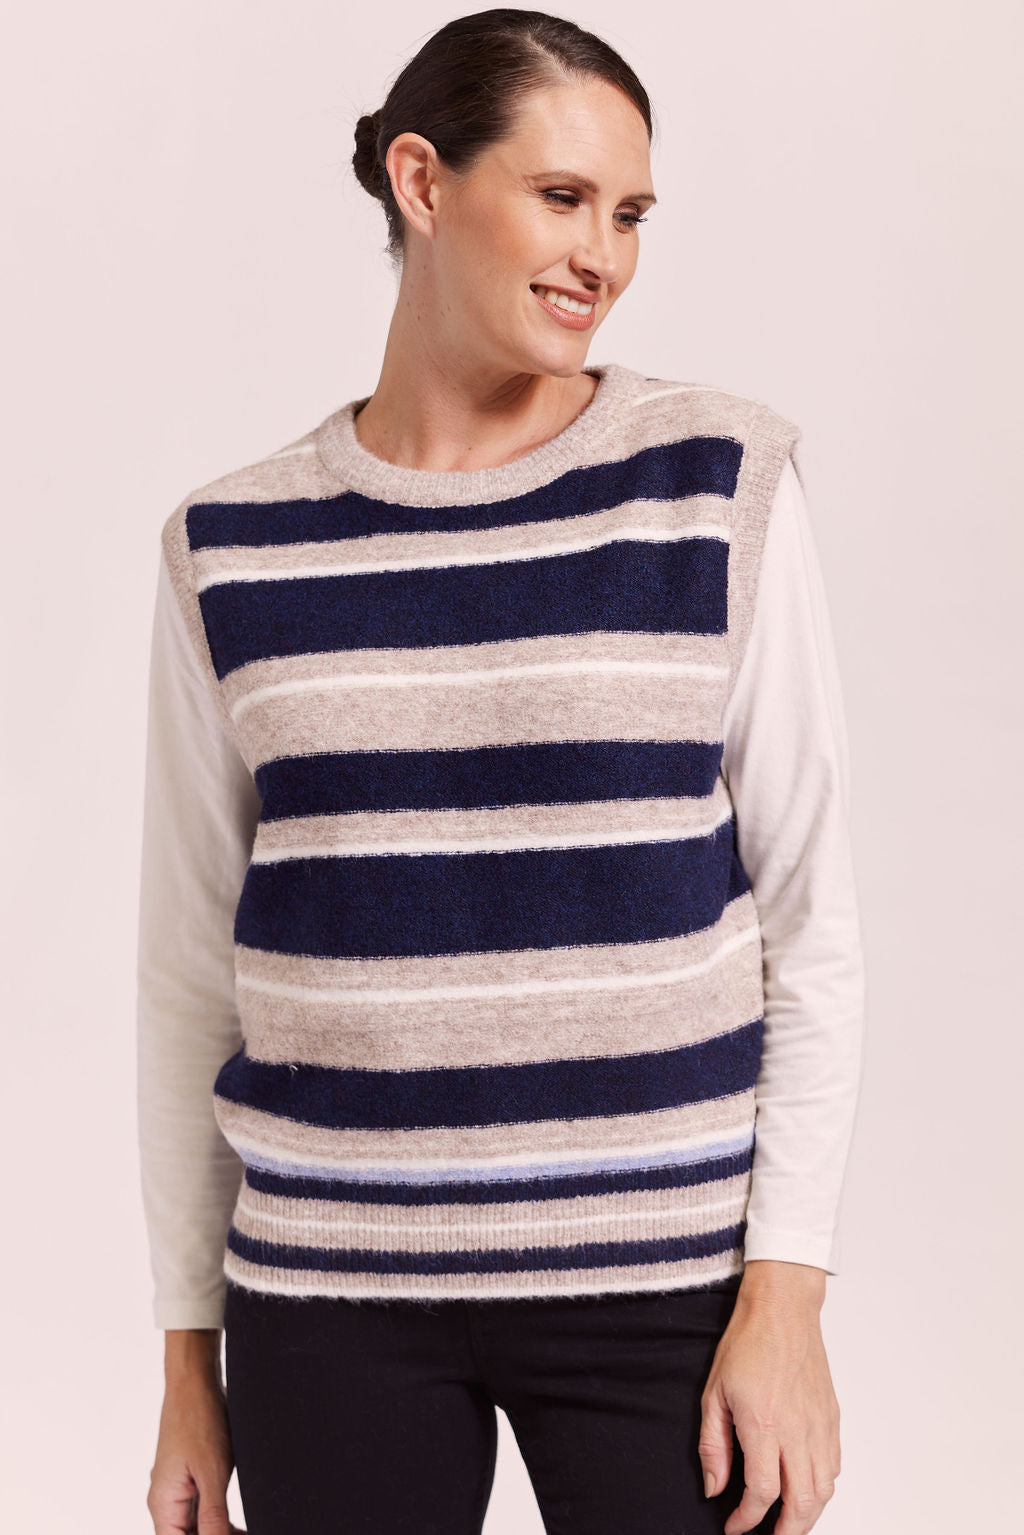 See Saw Striped Vest - Oatmeal/Navy